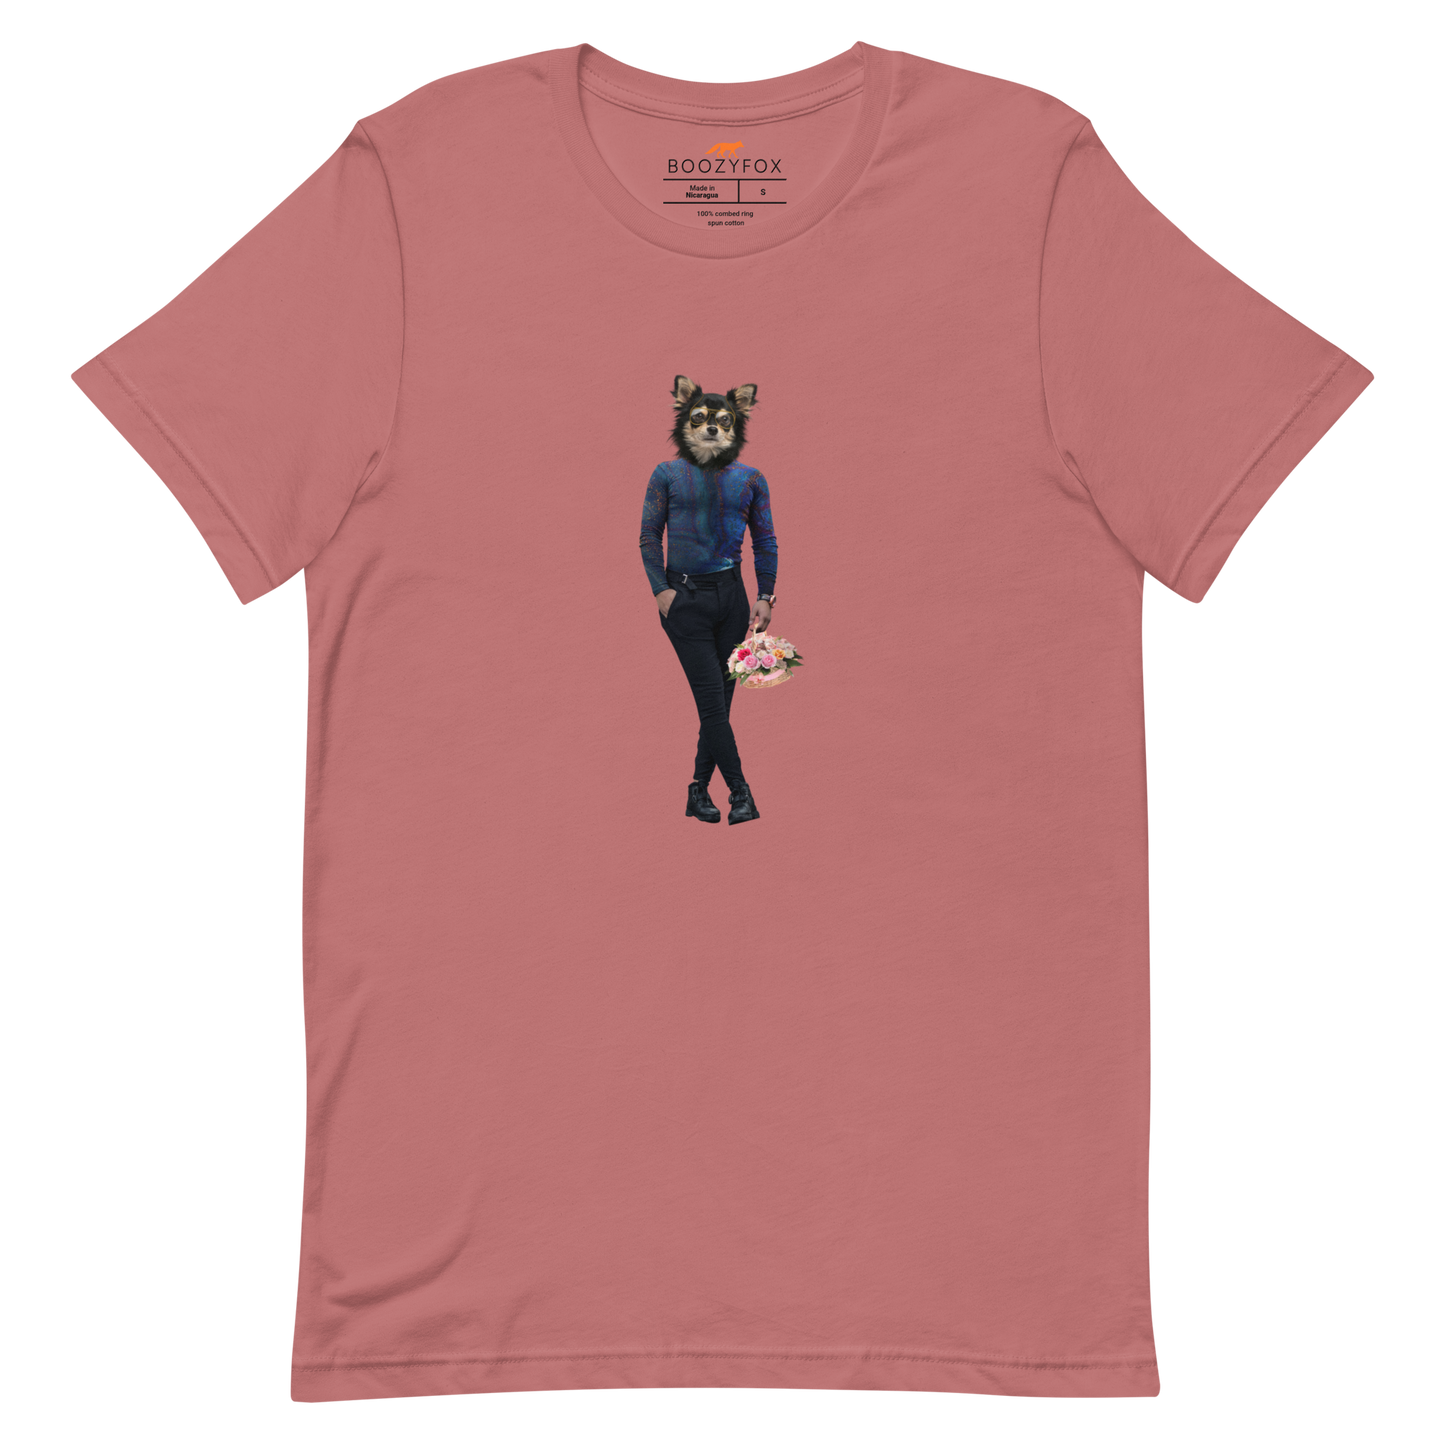 Mauve Premium Dog T-Shirt featuring an Anthropomorphic Dog graphic on the chest - Funny Graphic Dog Tees - Boozy Fox